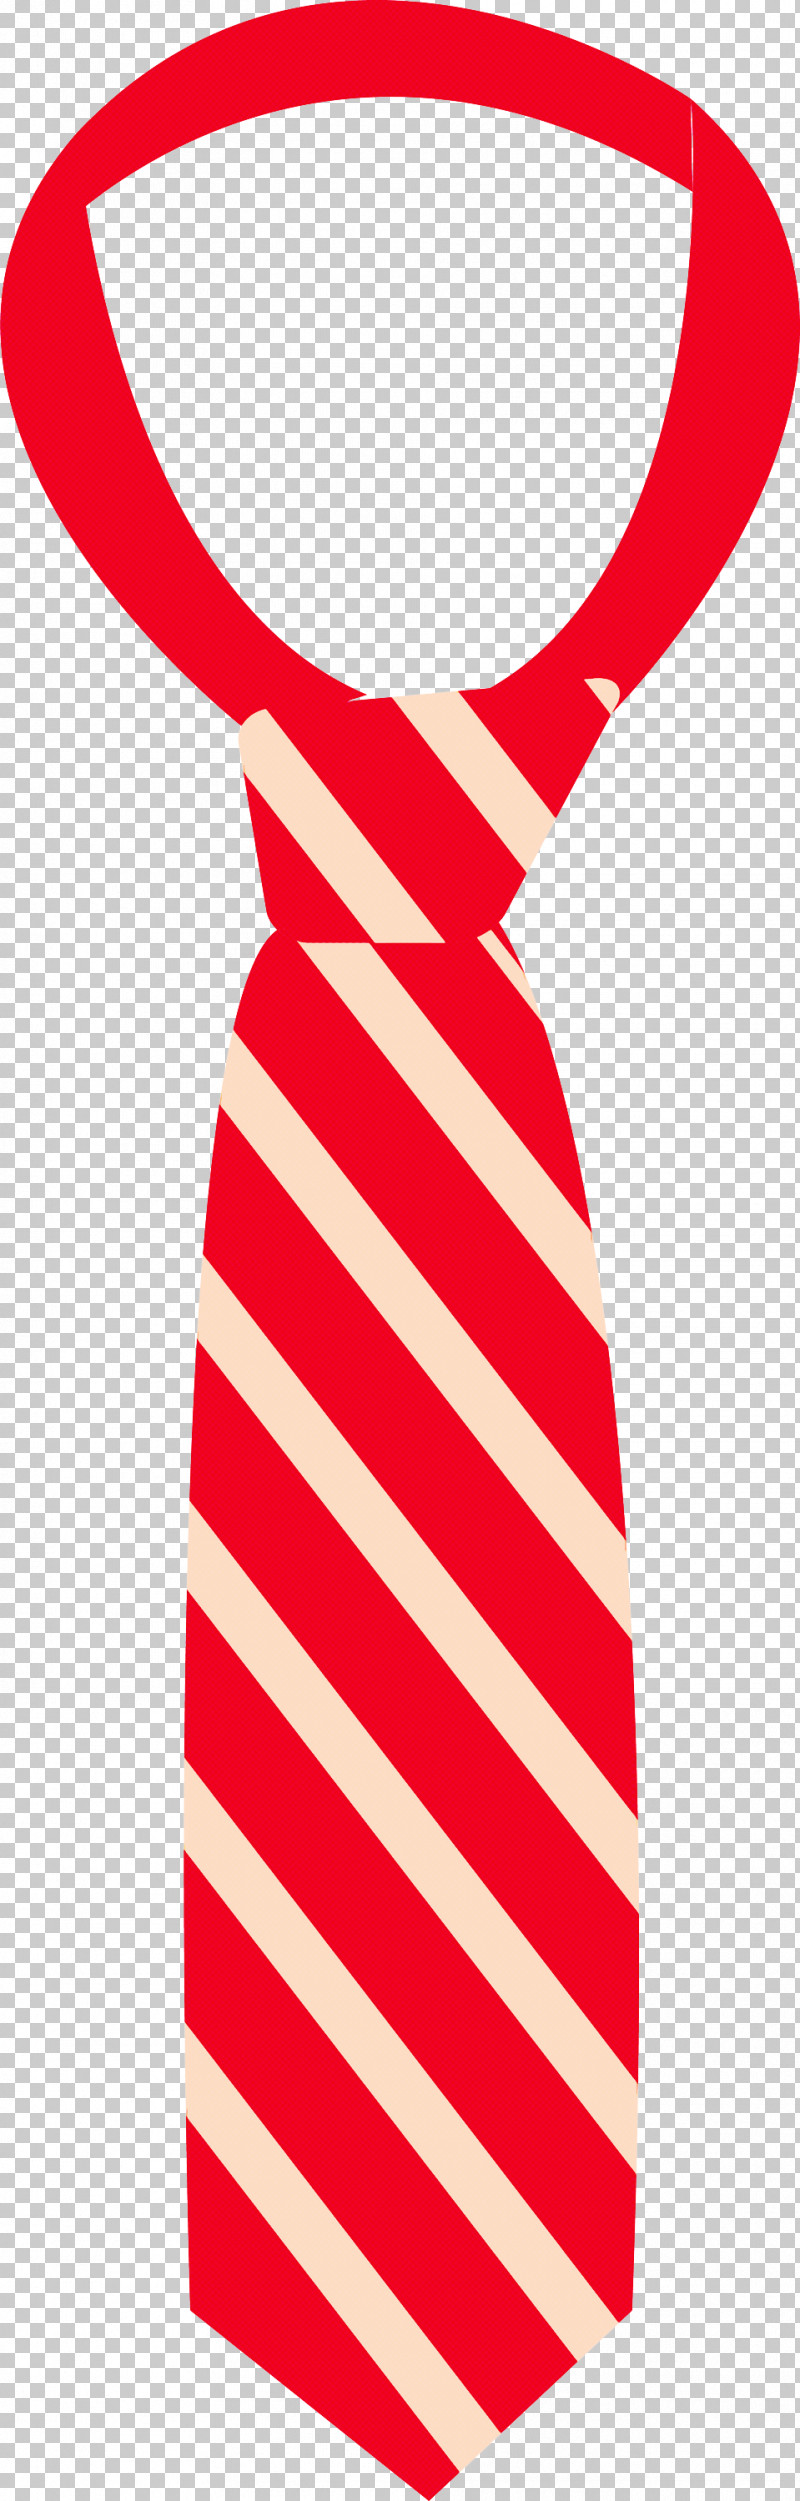 Day Dress Dress Clothing Red Cocktail Dress PNG, Clipart, Clothing, Cocktail Dress, Coverup, Day Dress, Dress Free PNG Download